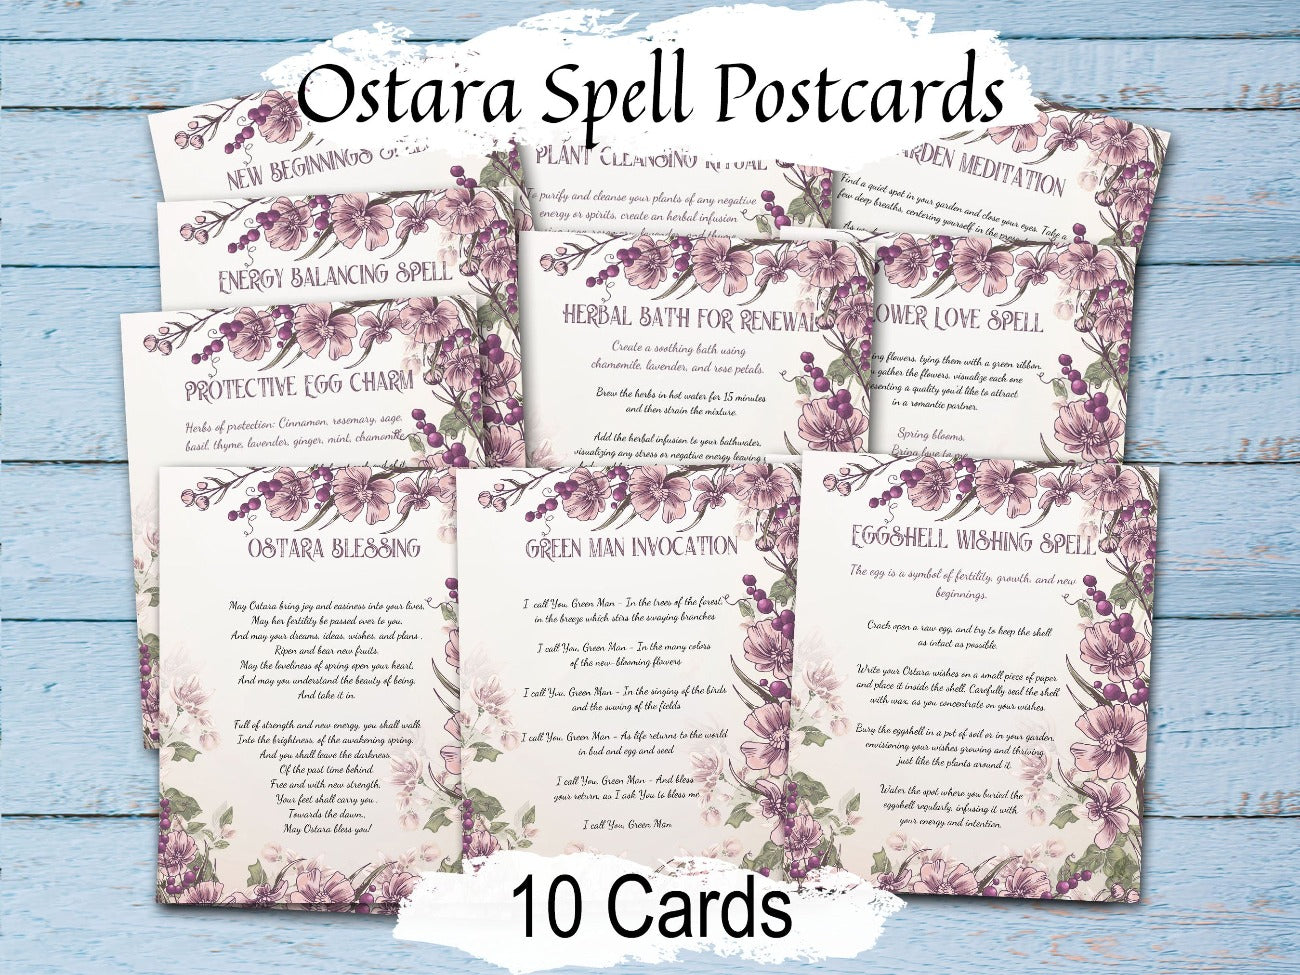 OSTARA SPELL CARDS, 10 Printable Postcards with easy to follow spells, Embrace the Spring Equinox energies of the Goddess Eostra - Morgana Magick Spell